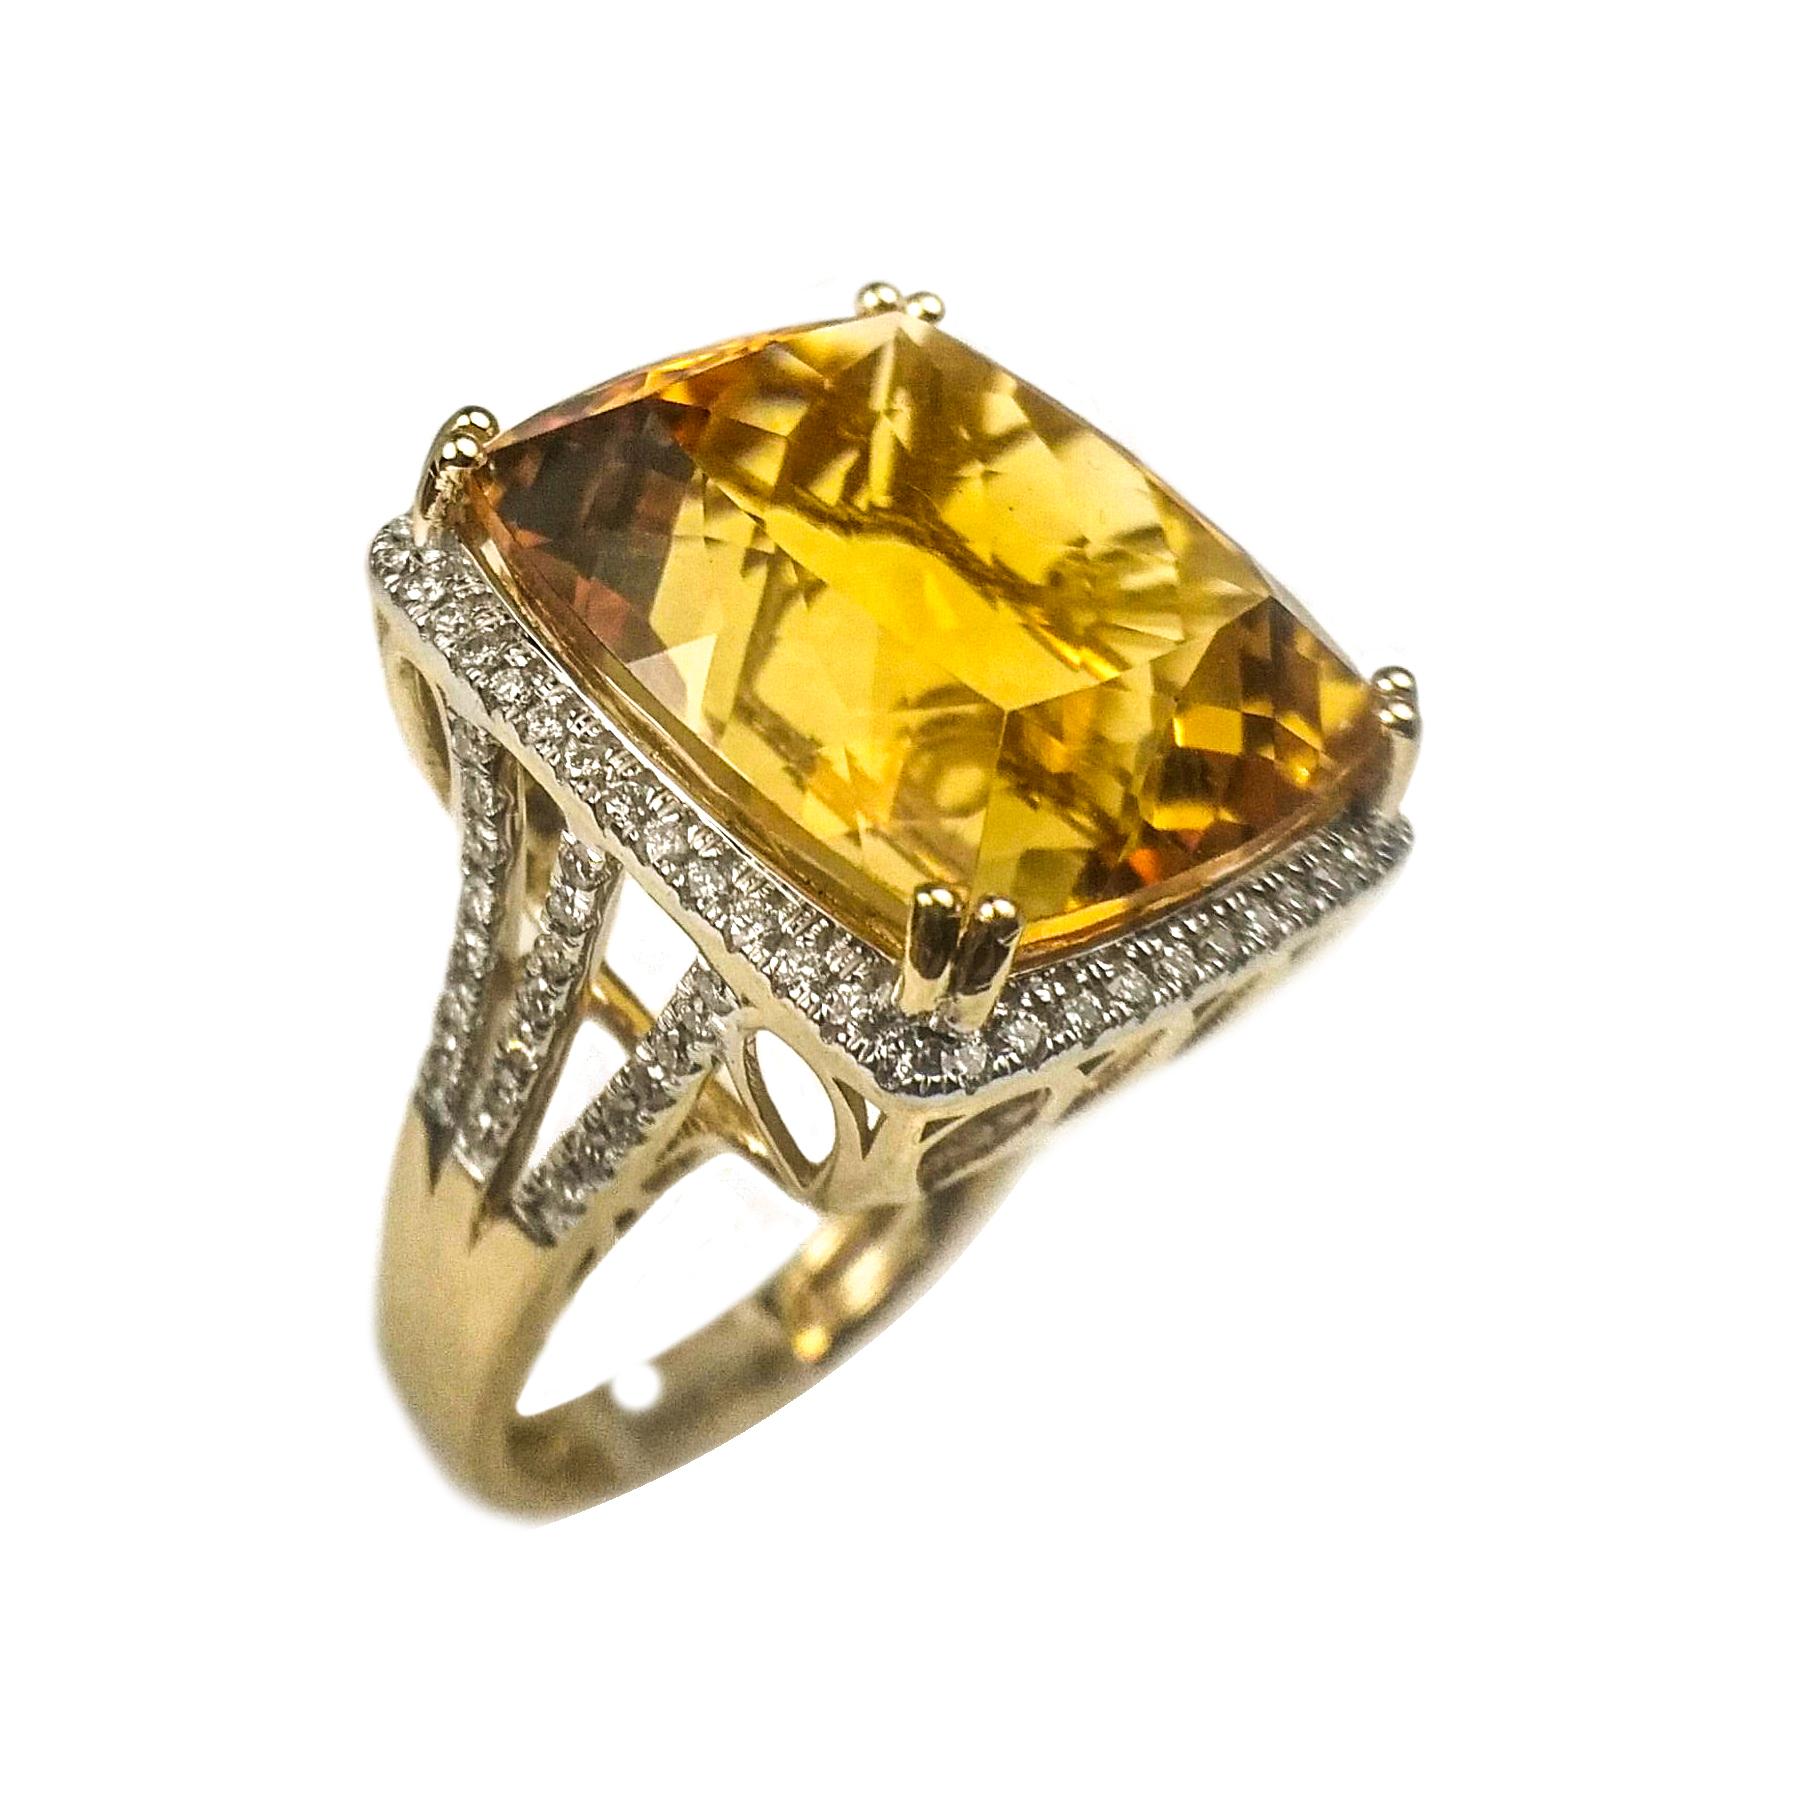 Glamorous citrine diamond ring. Handcrafted golden honey yellow, high luster, cushion faceted 21.61 carats citrine set in high profile, encased in basket mounting with eight bead prongs, accented with round brilliant cut diamonds on frame and 3